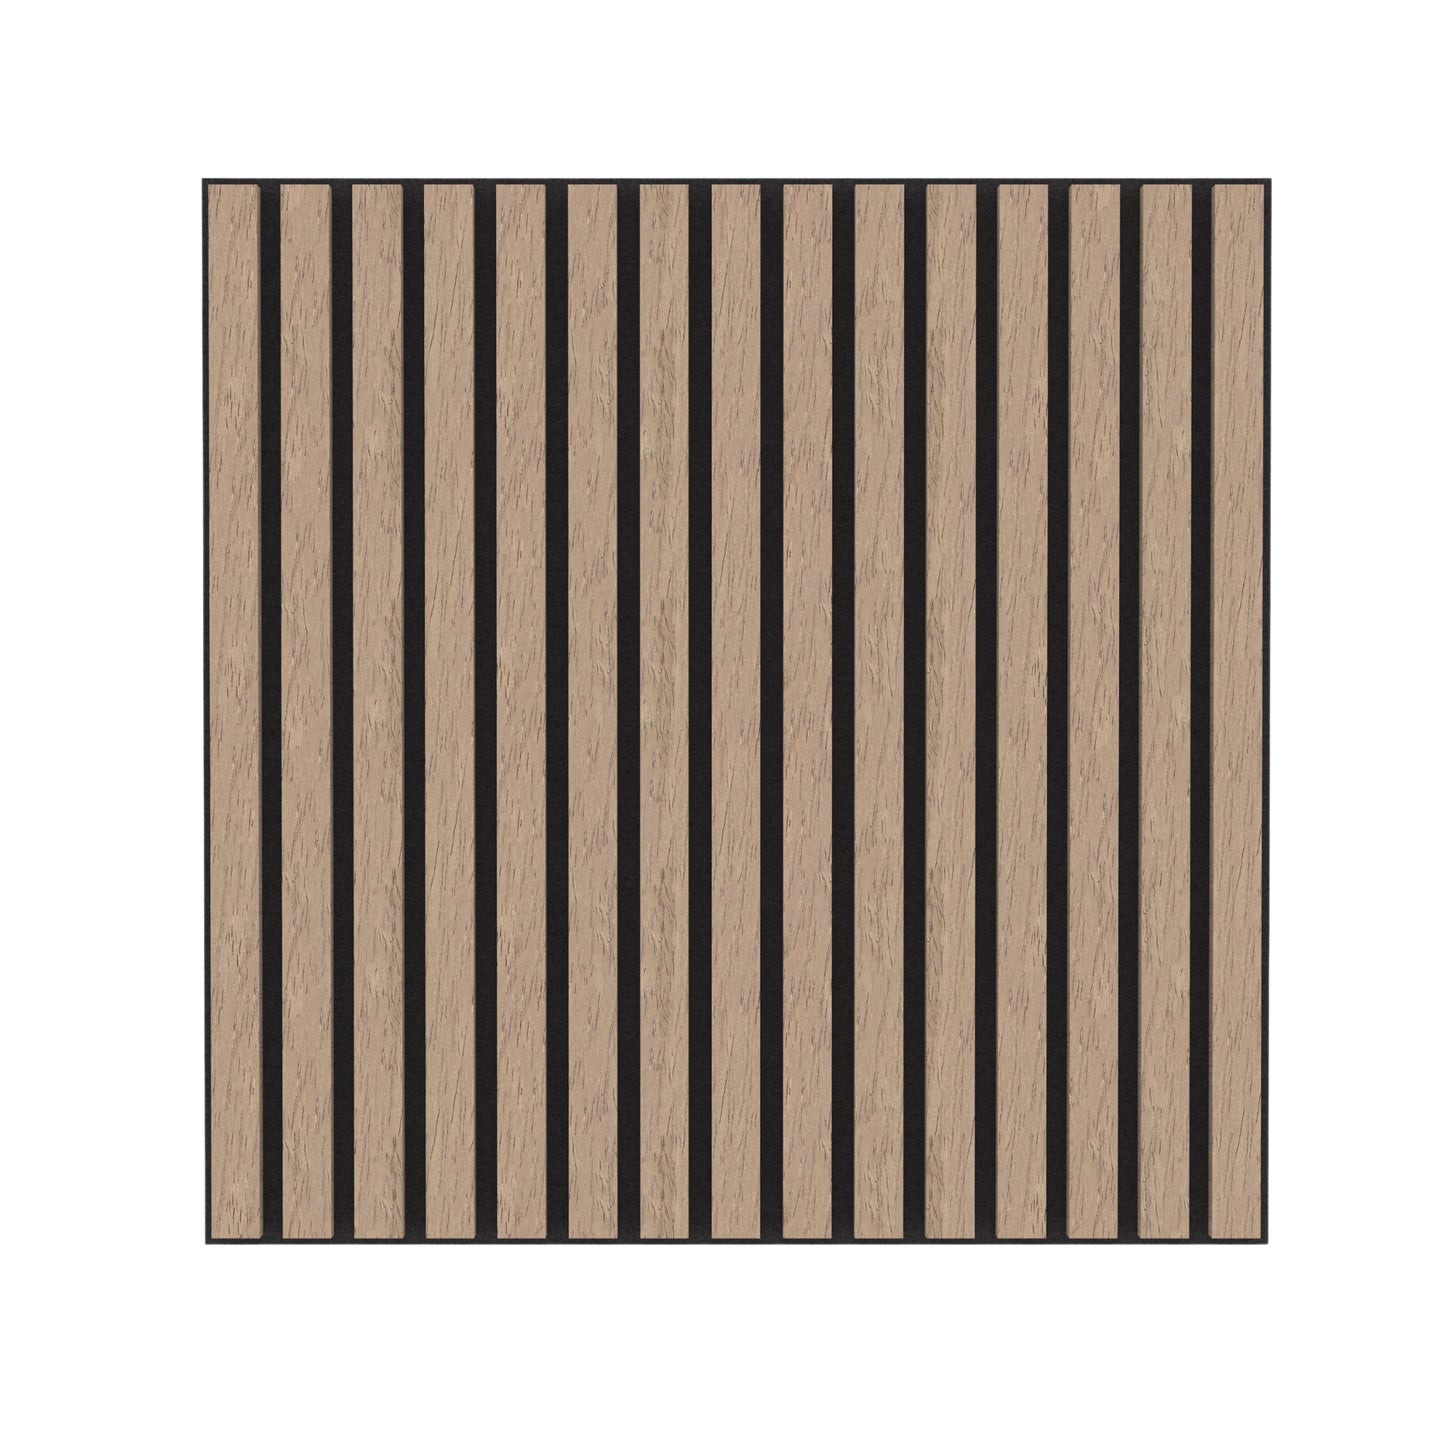 Walnut Acoustic Wood Wall Panel Tiles Series 1 - 60x60cm (4 Pack)